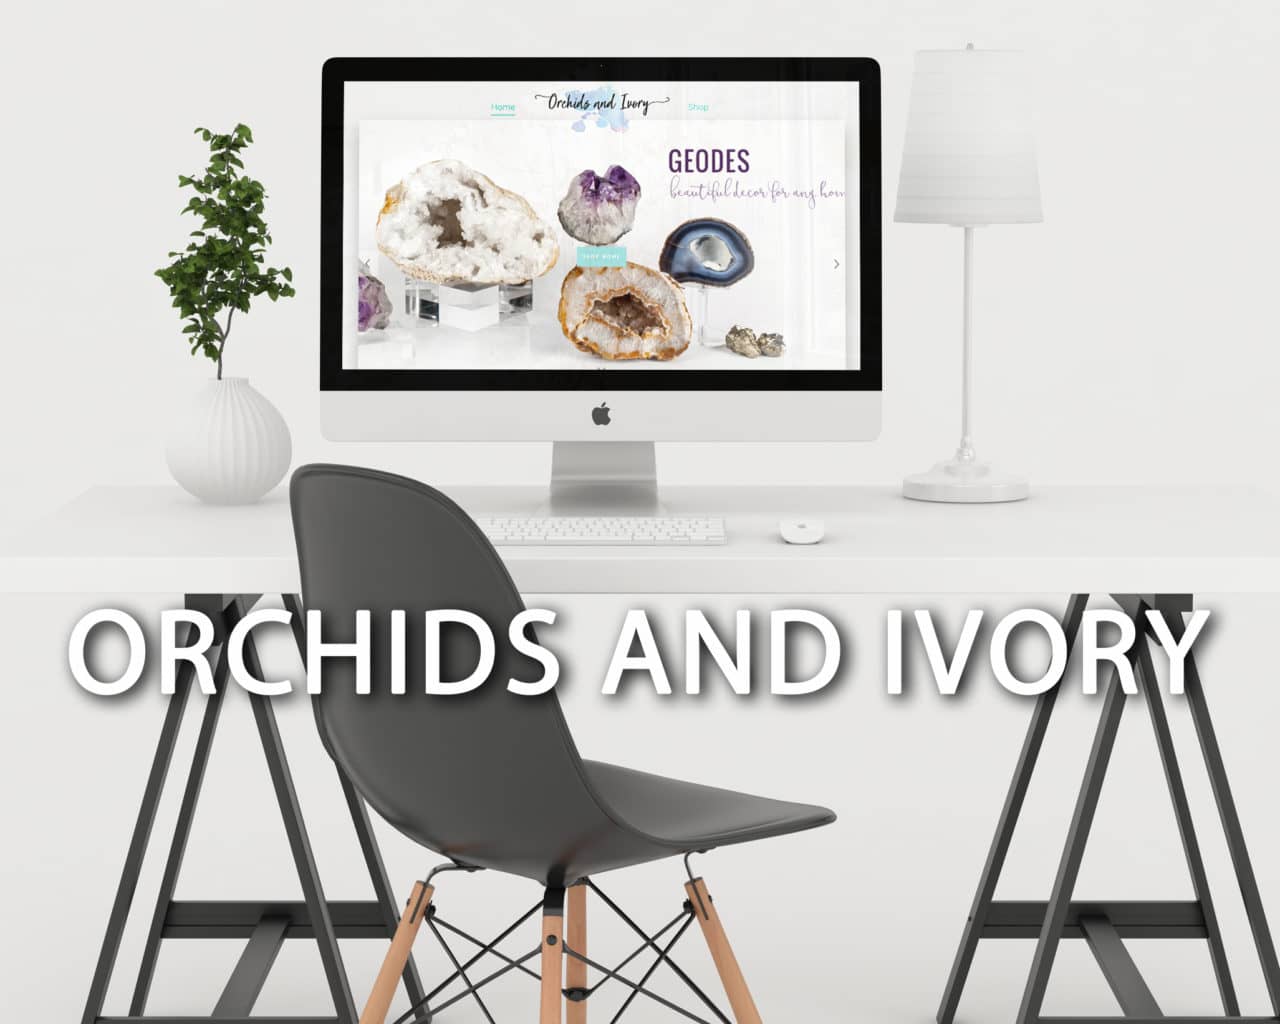 Orchids and Ivory website design